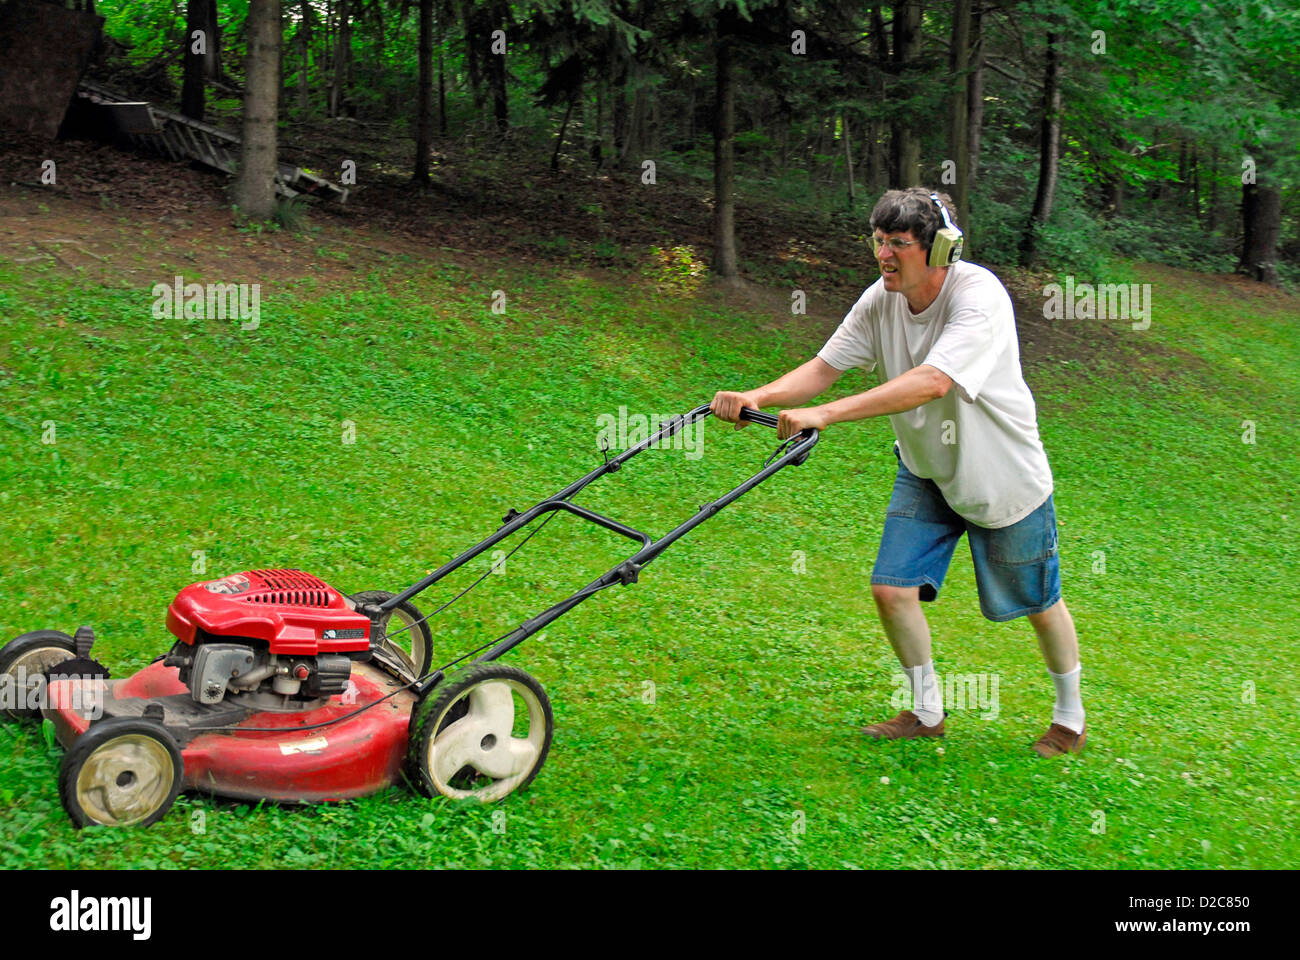 Man Mowing Lawn With Ear Protectors Stock Photo